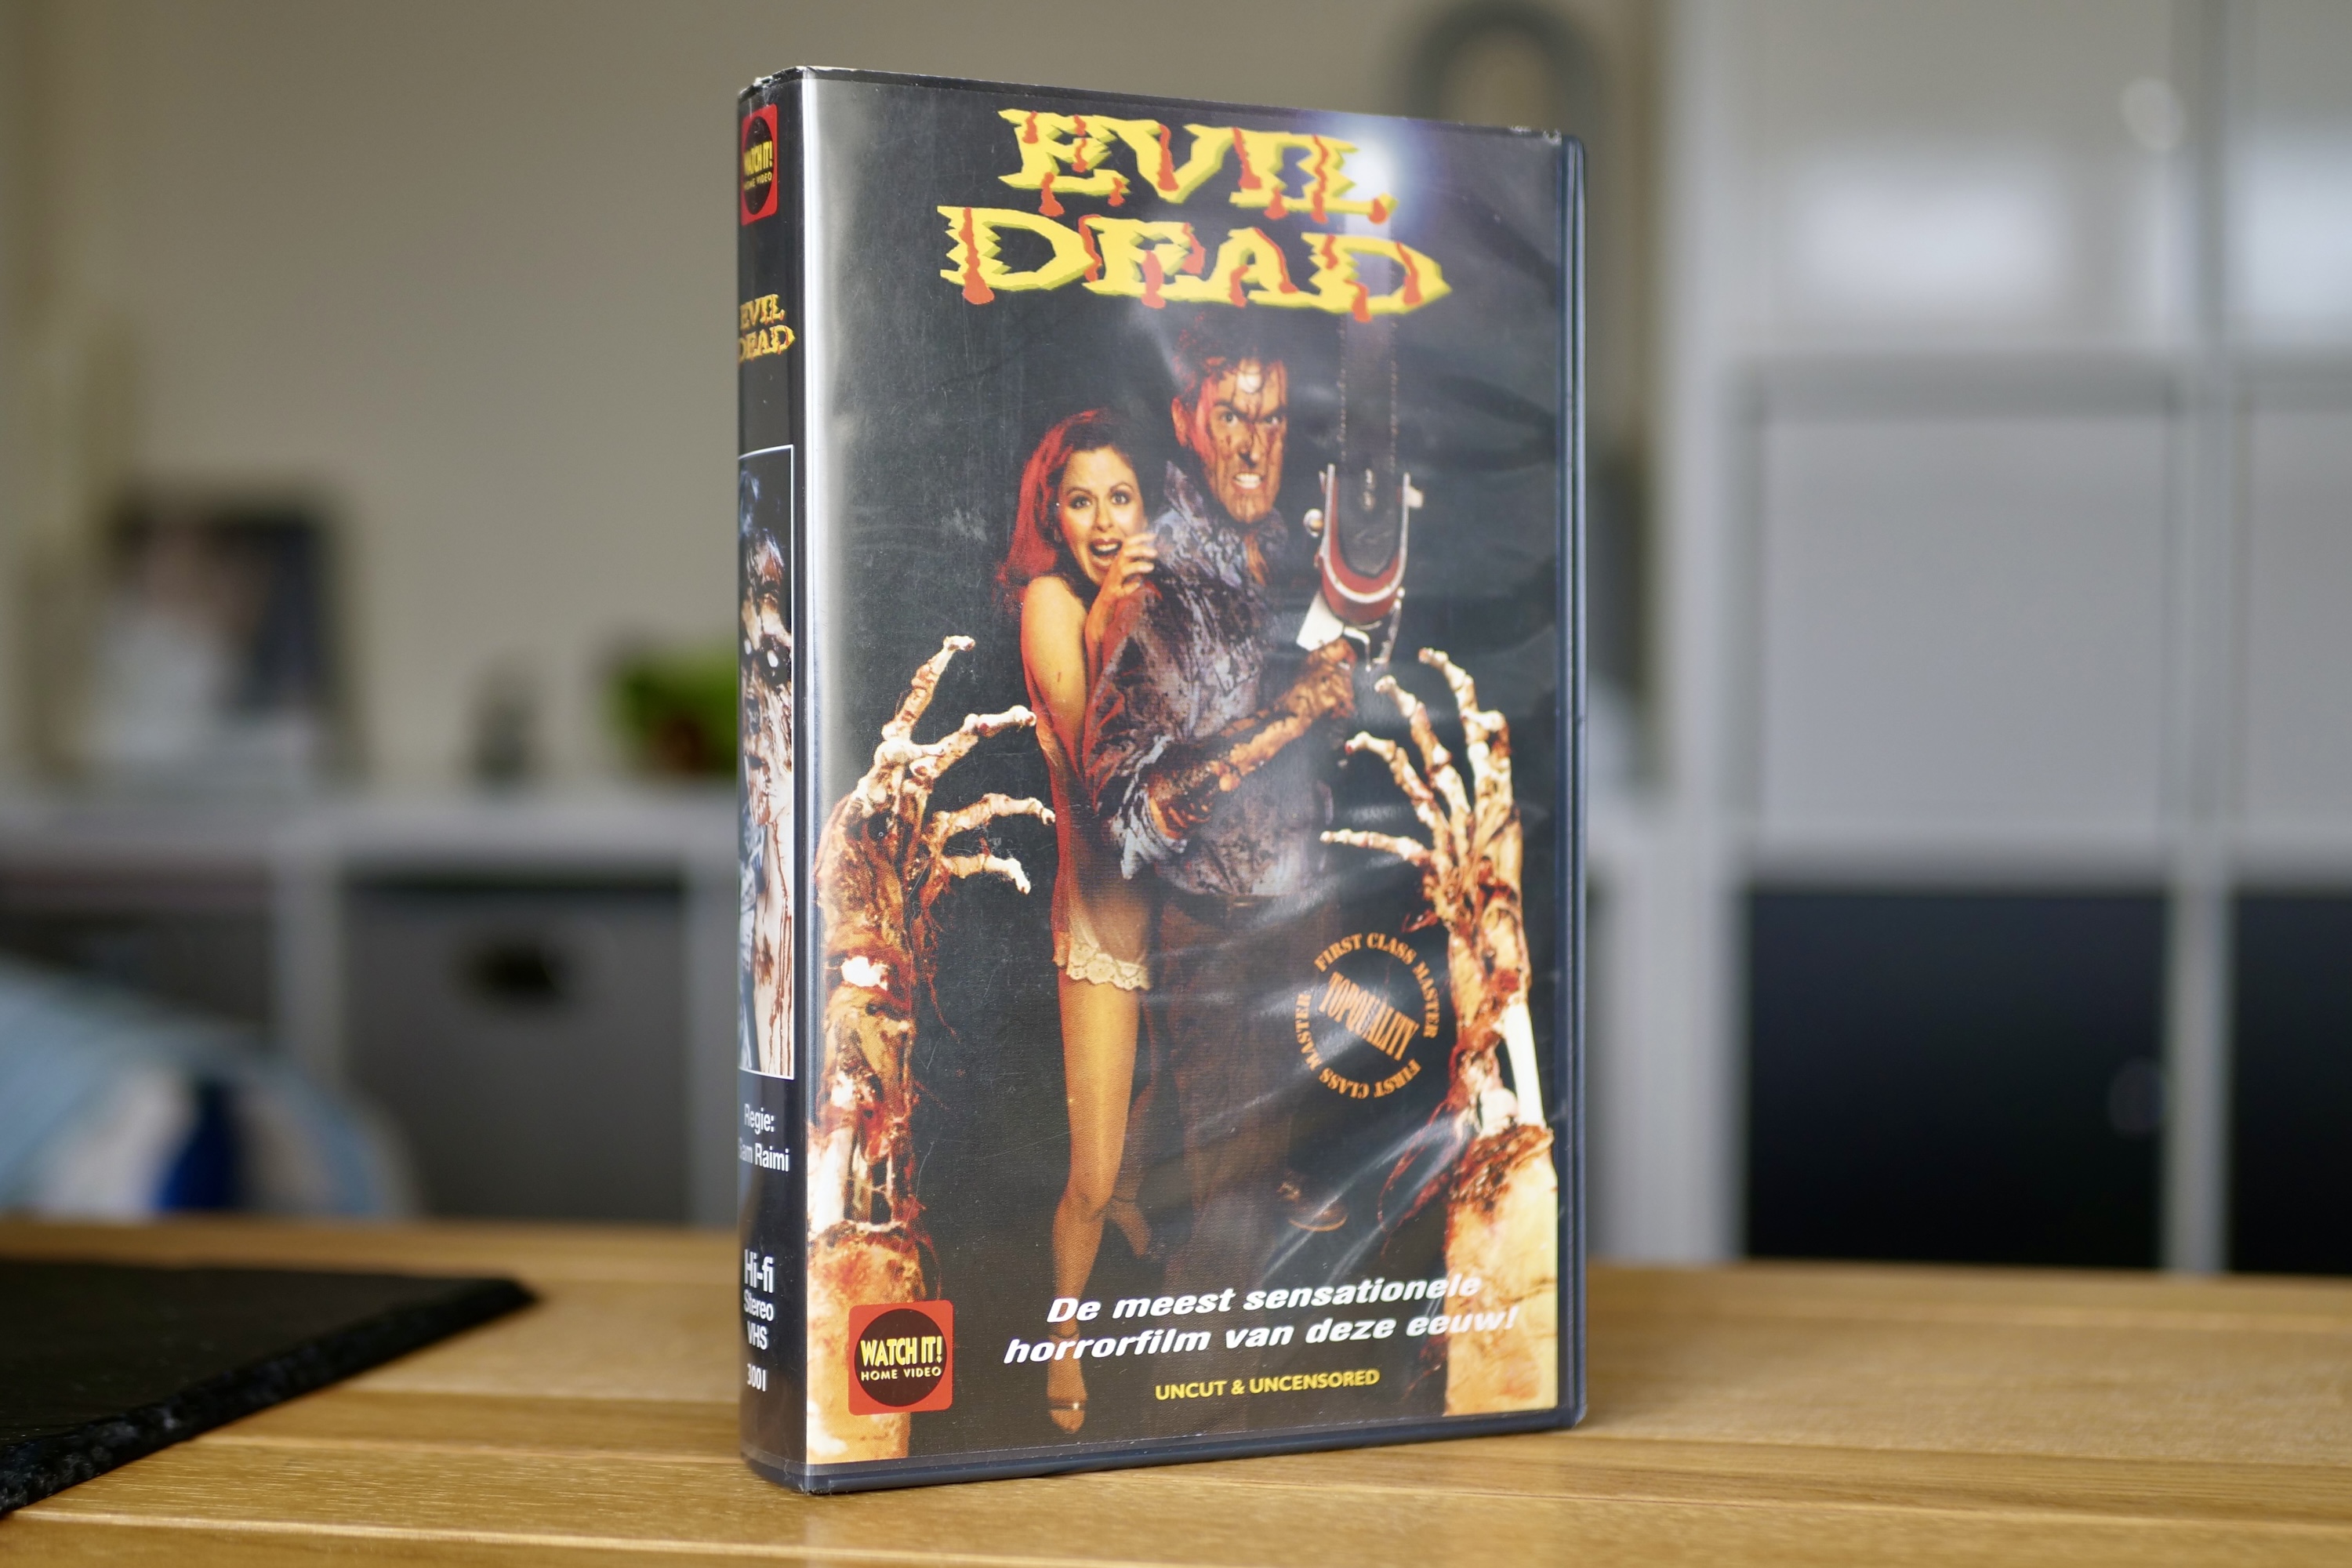 The front cover of a The Evil Dead VHS box.